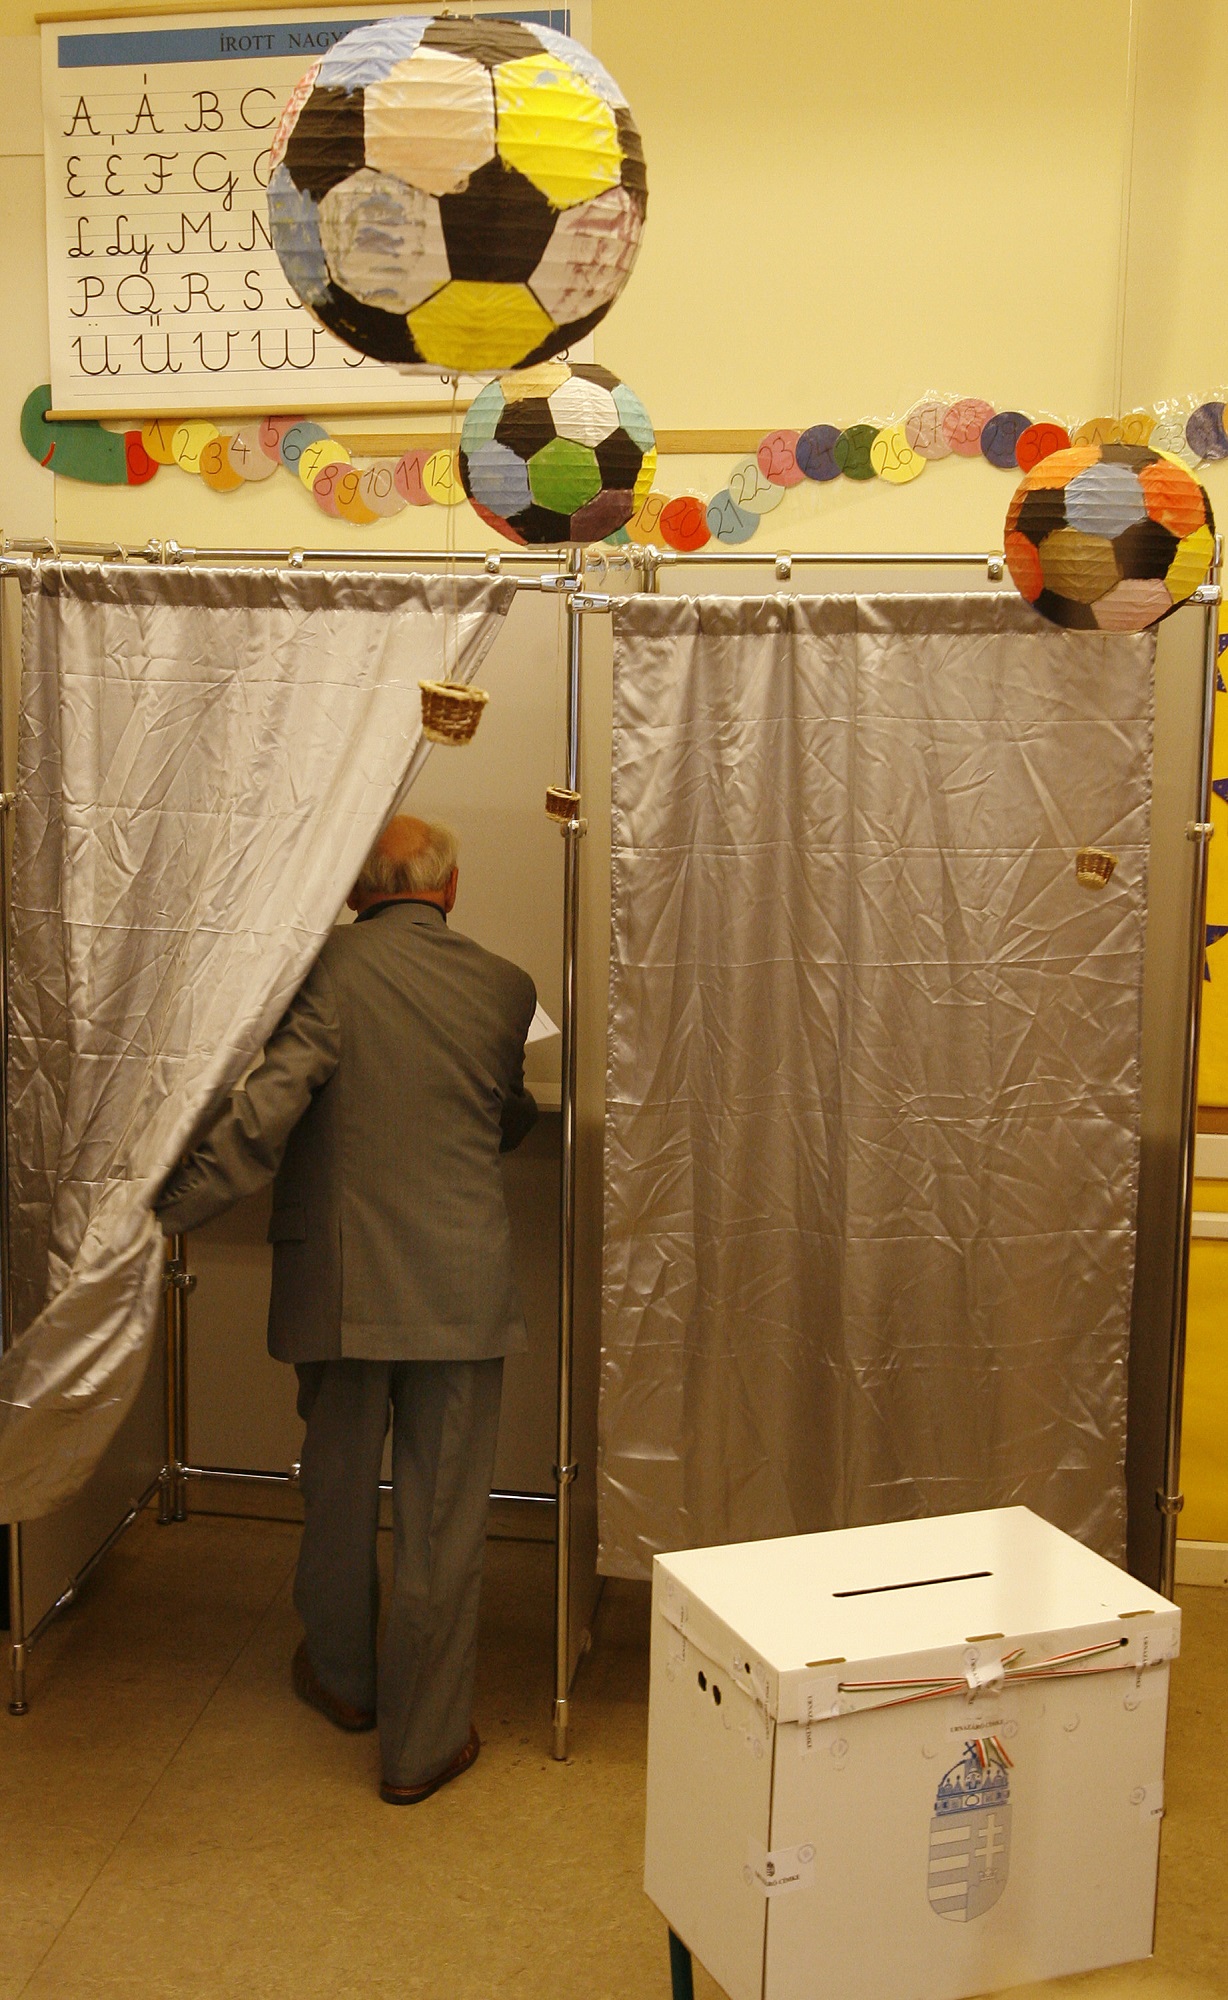 Former Hungarian President Arpad Goencz enters a polling booth before voting in the municipal elections in Budapest 01 October 2006. Hungarian Prime Minister Ferenc Gyurcsany rejected making the local elections a referendum on his government despite right-wing calls that he resign after lying to the country about the economy. AFP PHOTO/JOE KLAMAR